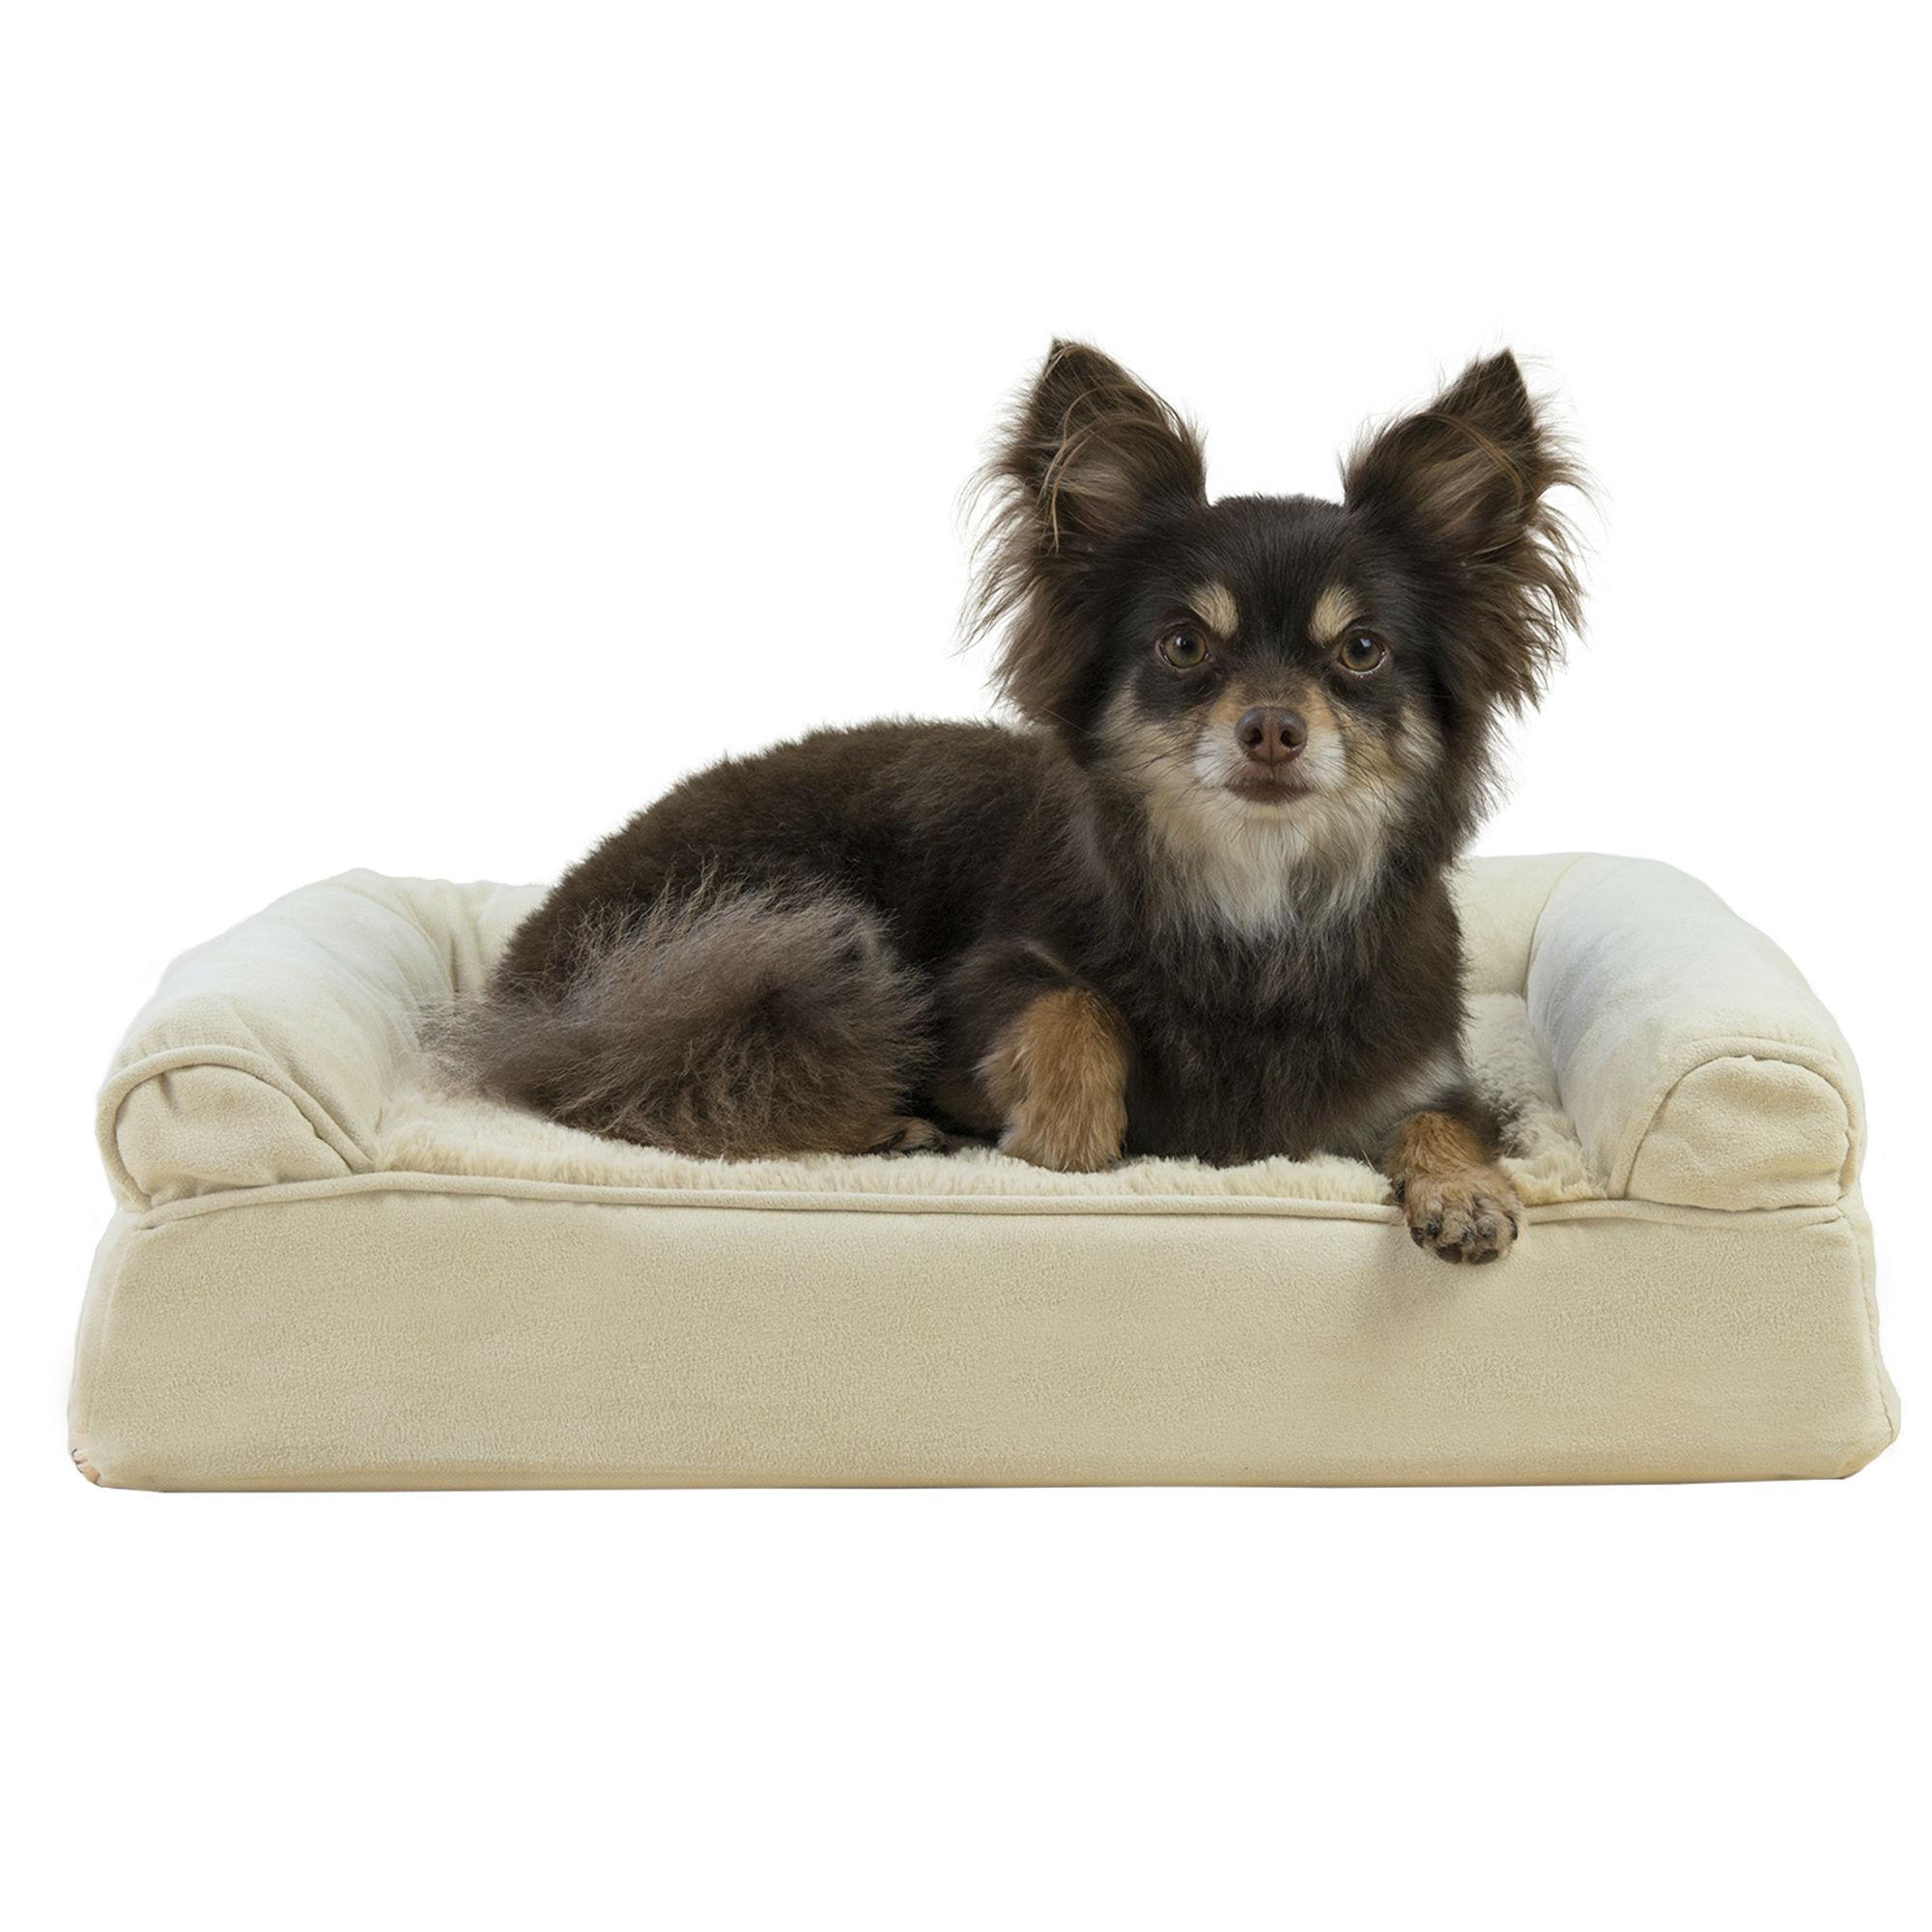 Furhaven Plush & Suede Orthopedic Sofa Pet Bed - Clay